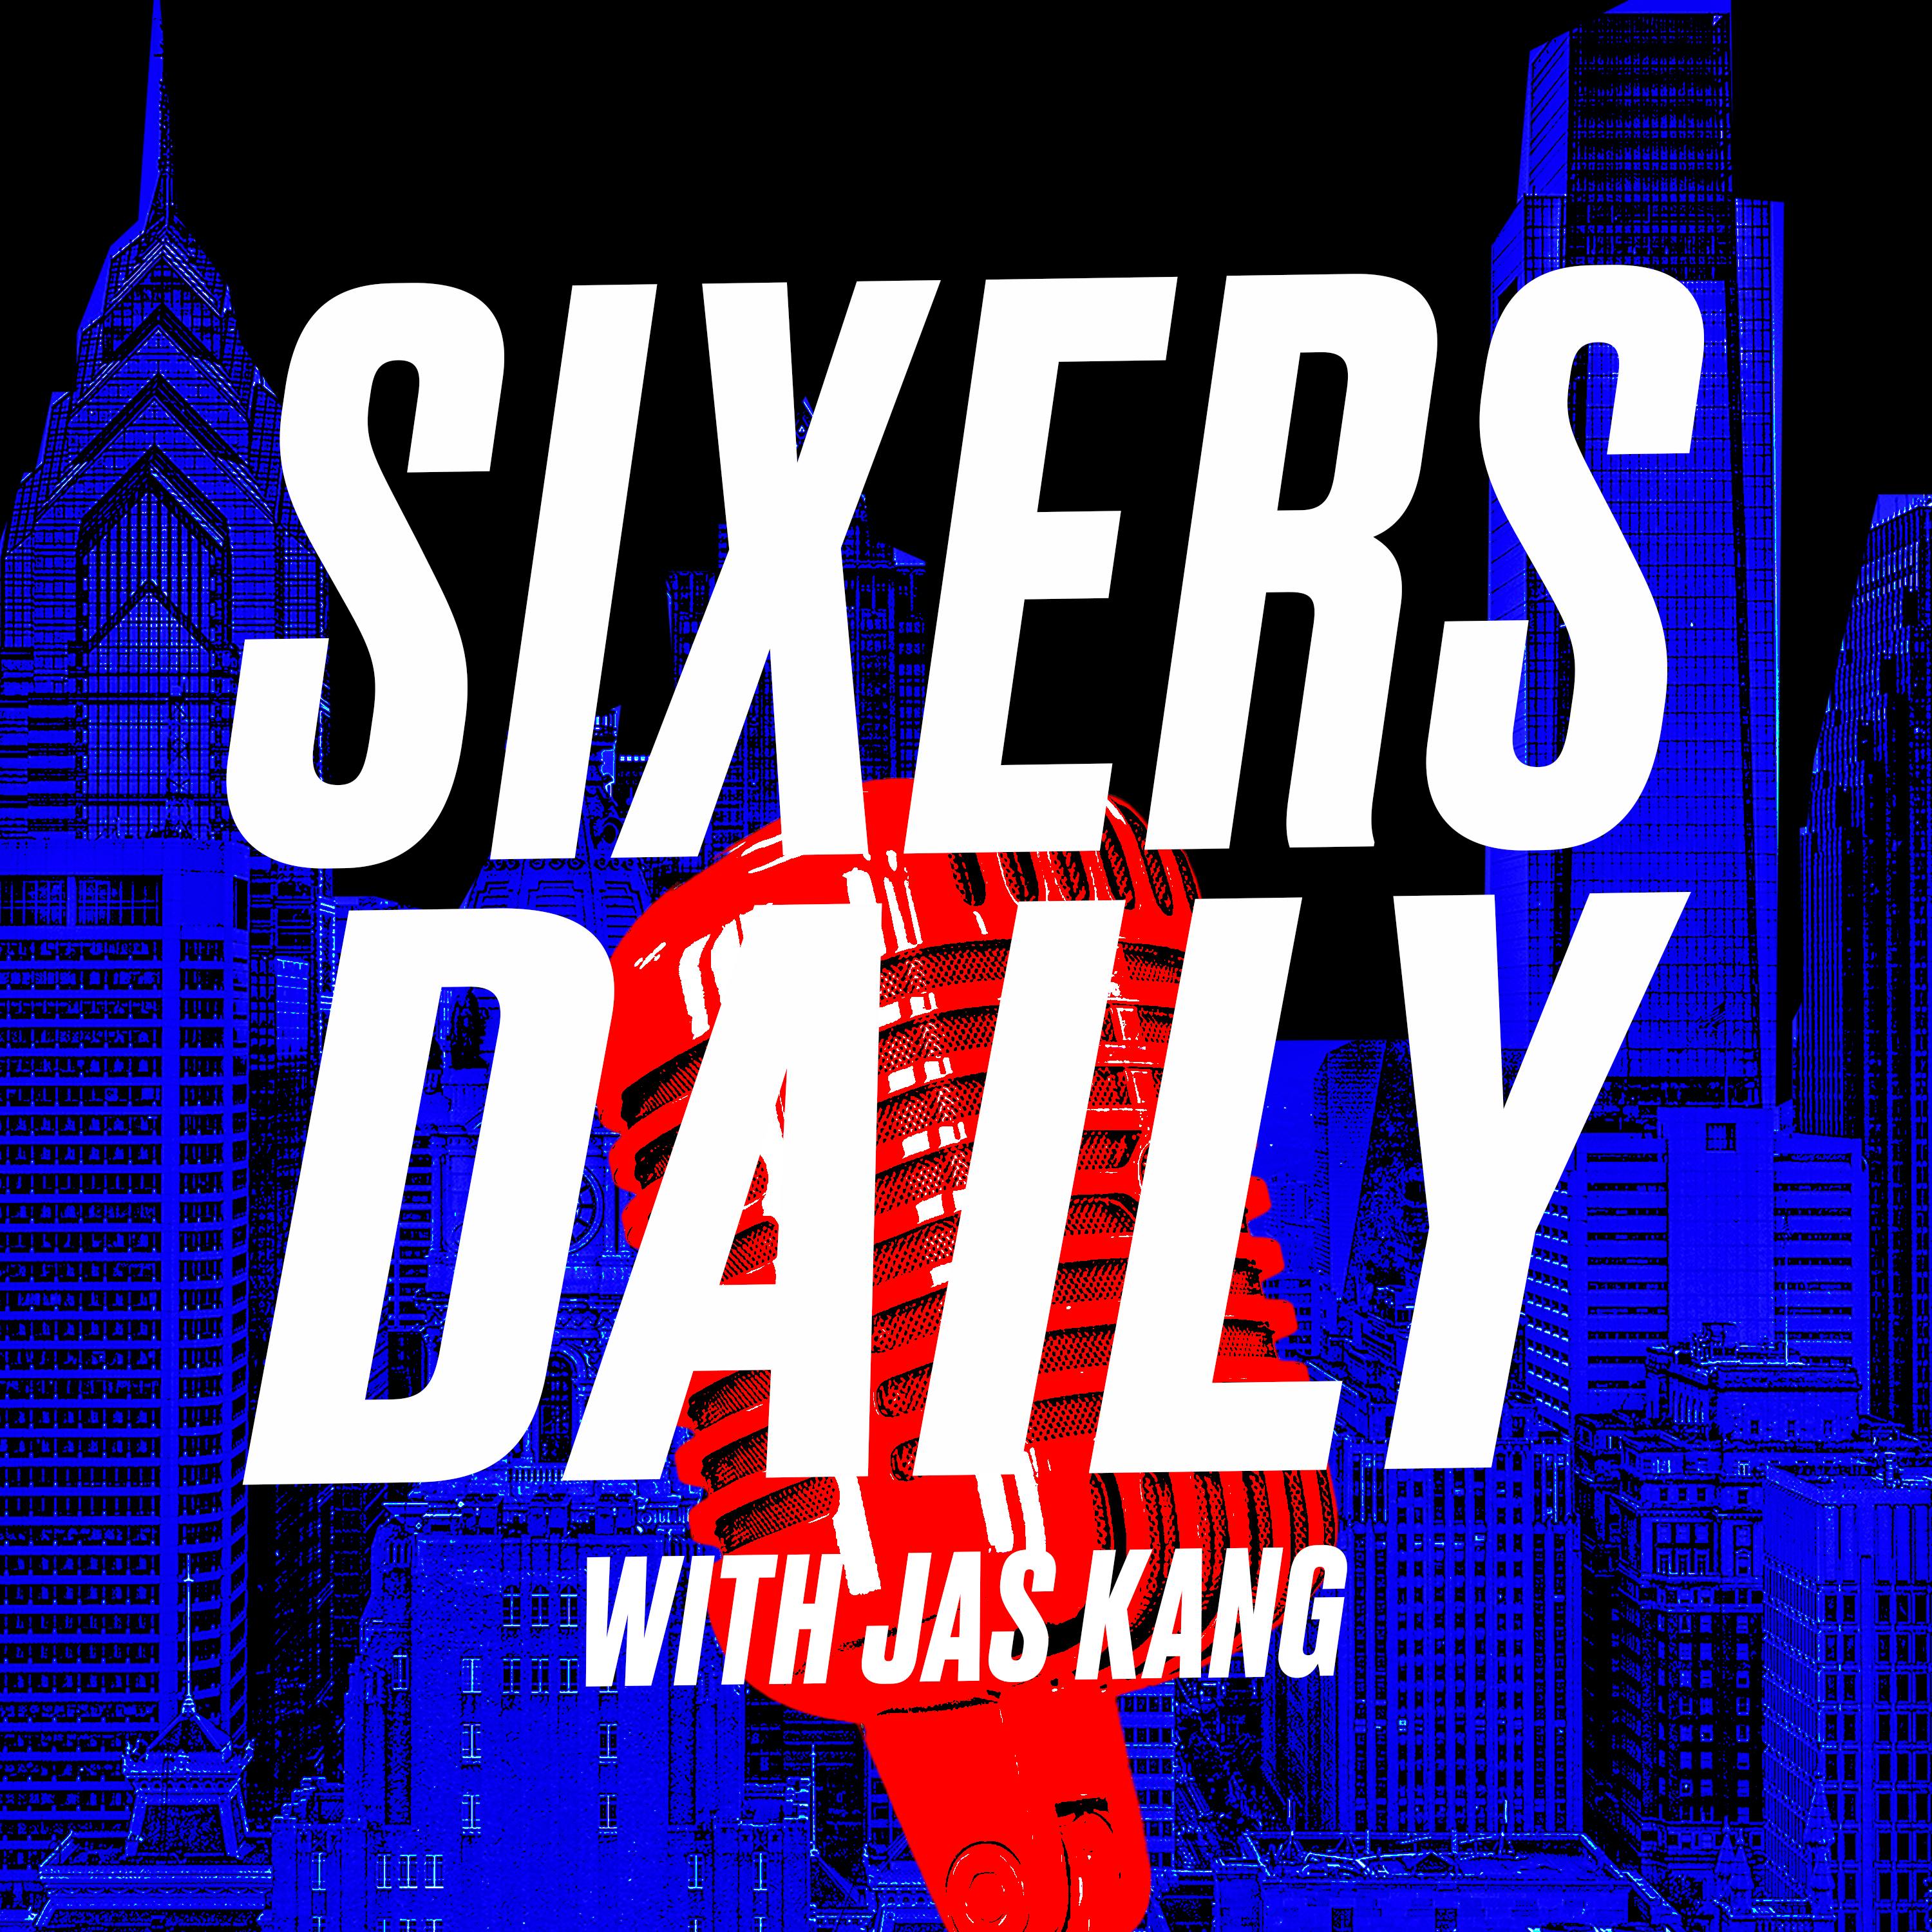 Sixers Daily with Jas Kang (Part 2) - NBA Finals preview with Adam Taylor of Celtics Blog and Brady Klopfer from SB Nation's Warriors site.